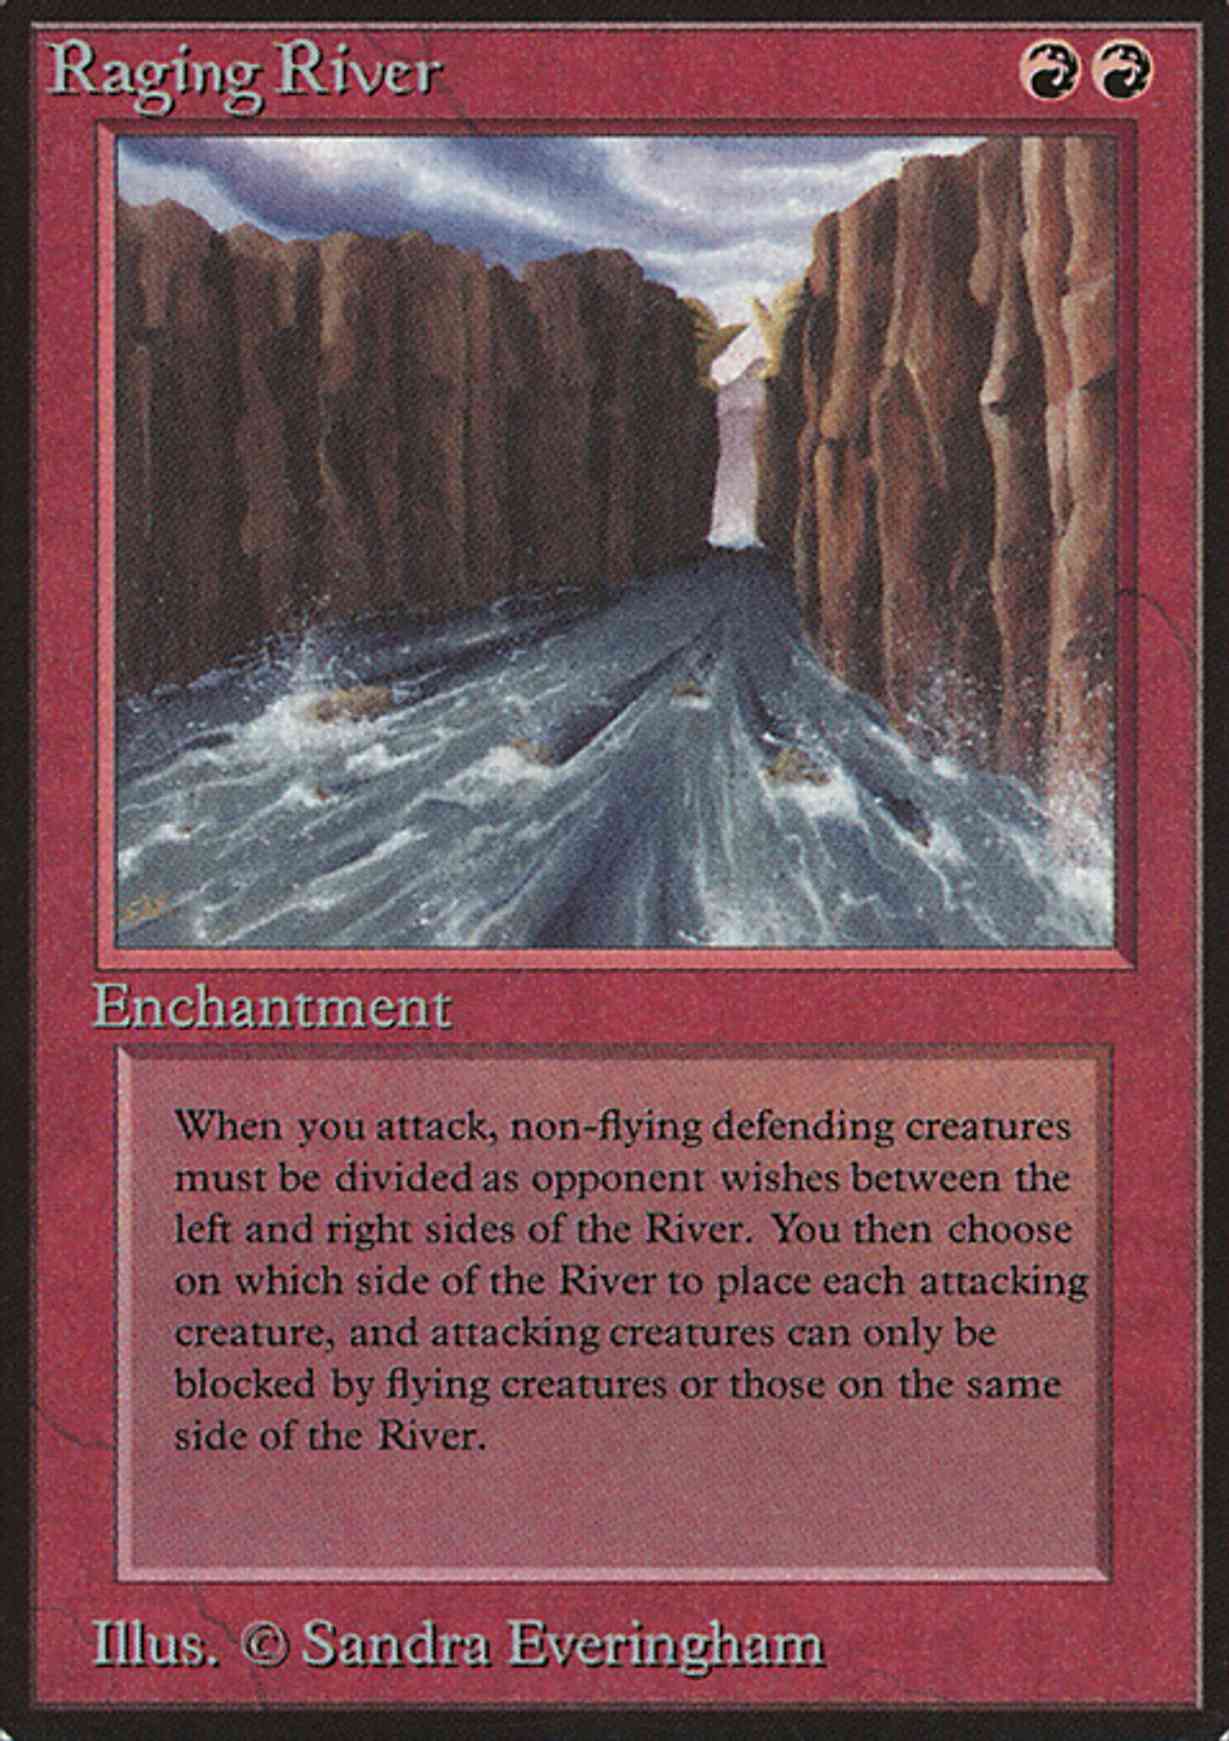 Raging River magic card front